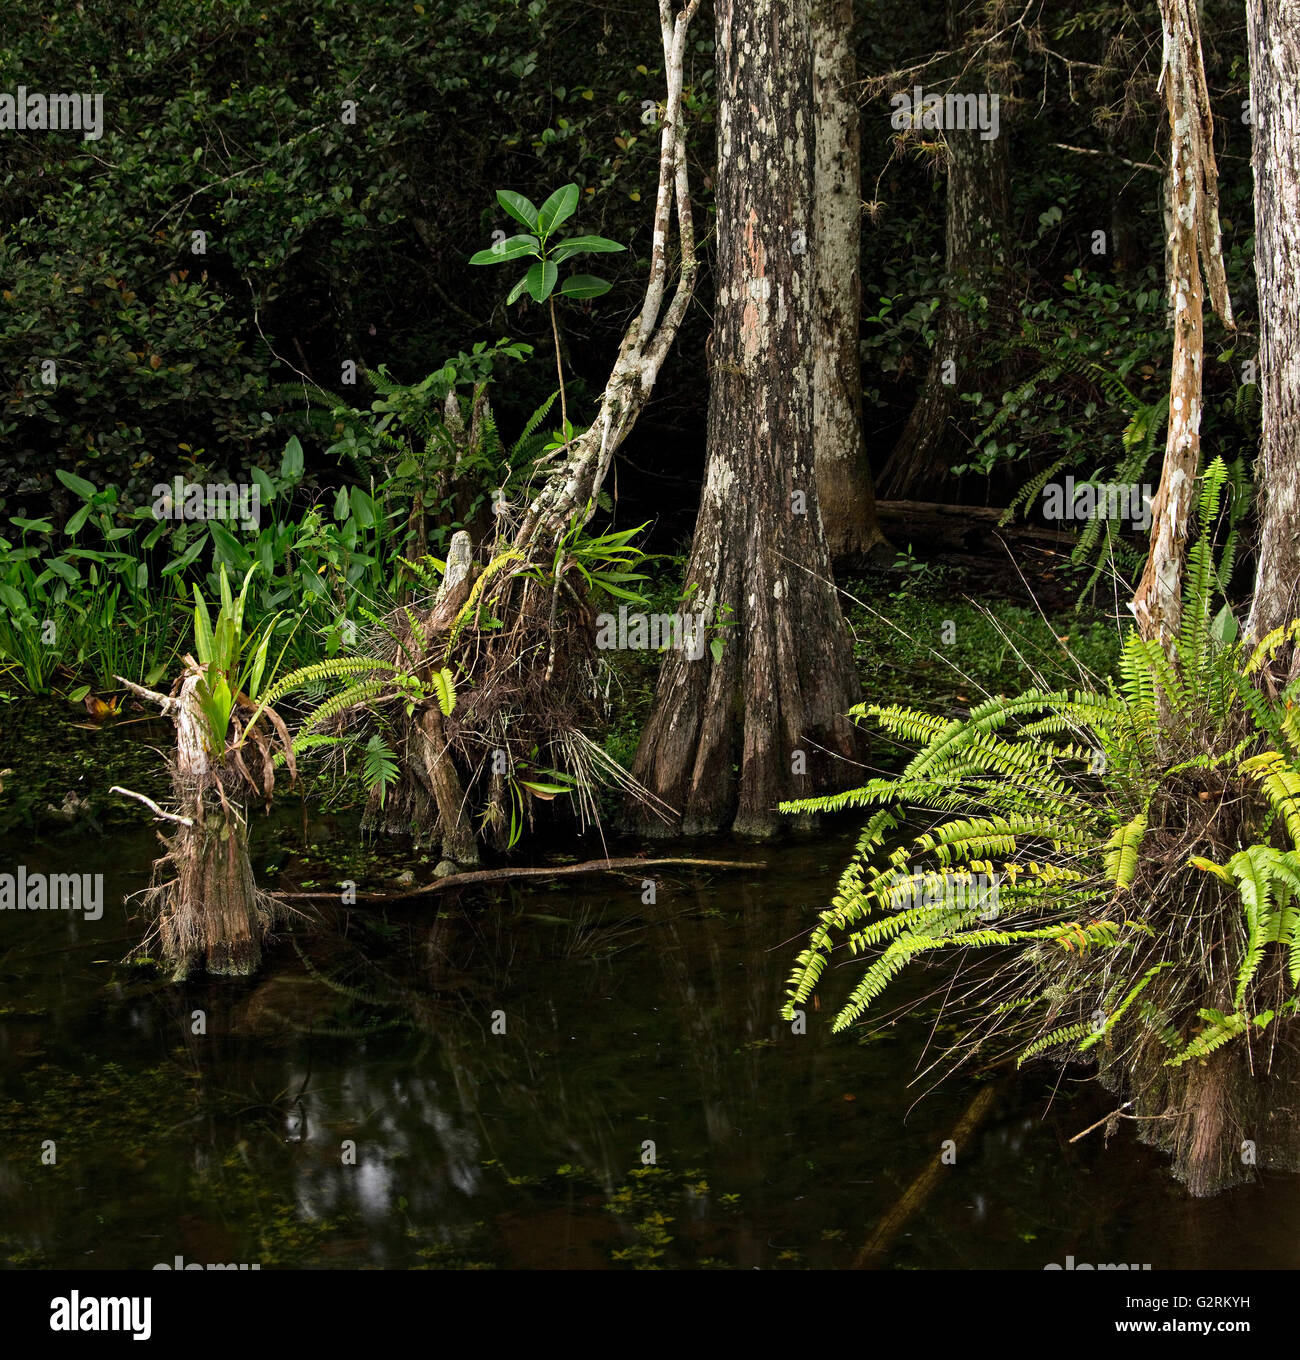 Lush ferns adorn the bases of beautiful Bald Cypress trees in the Florida Everglades Stock Photo